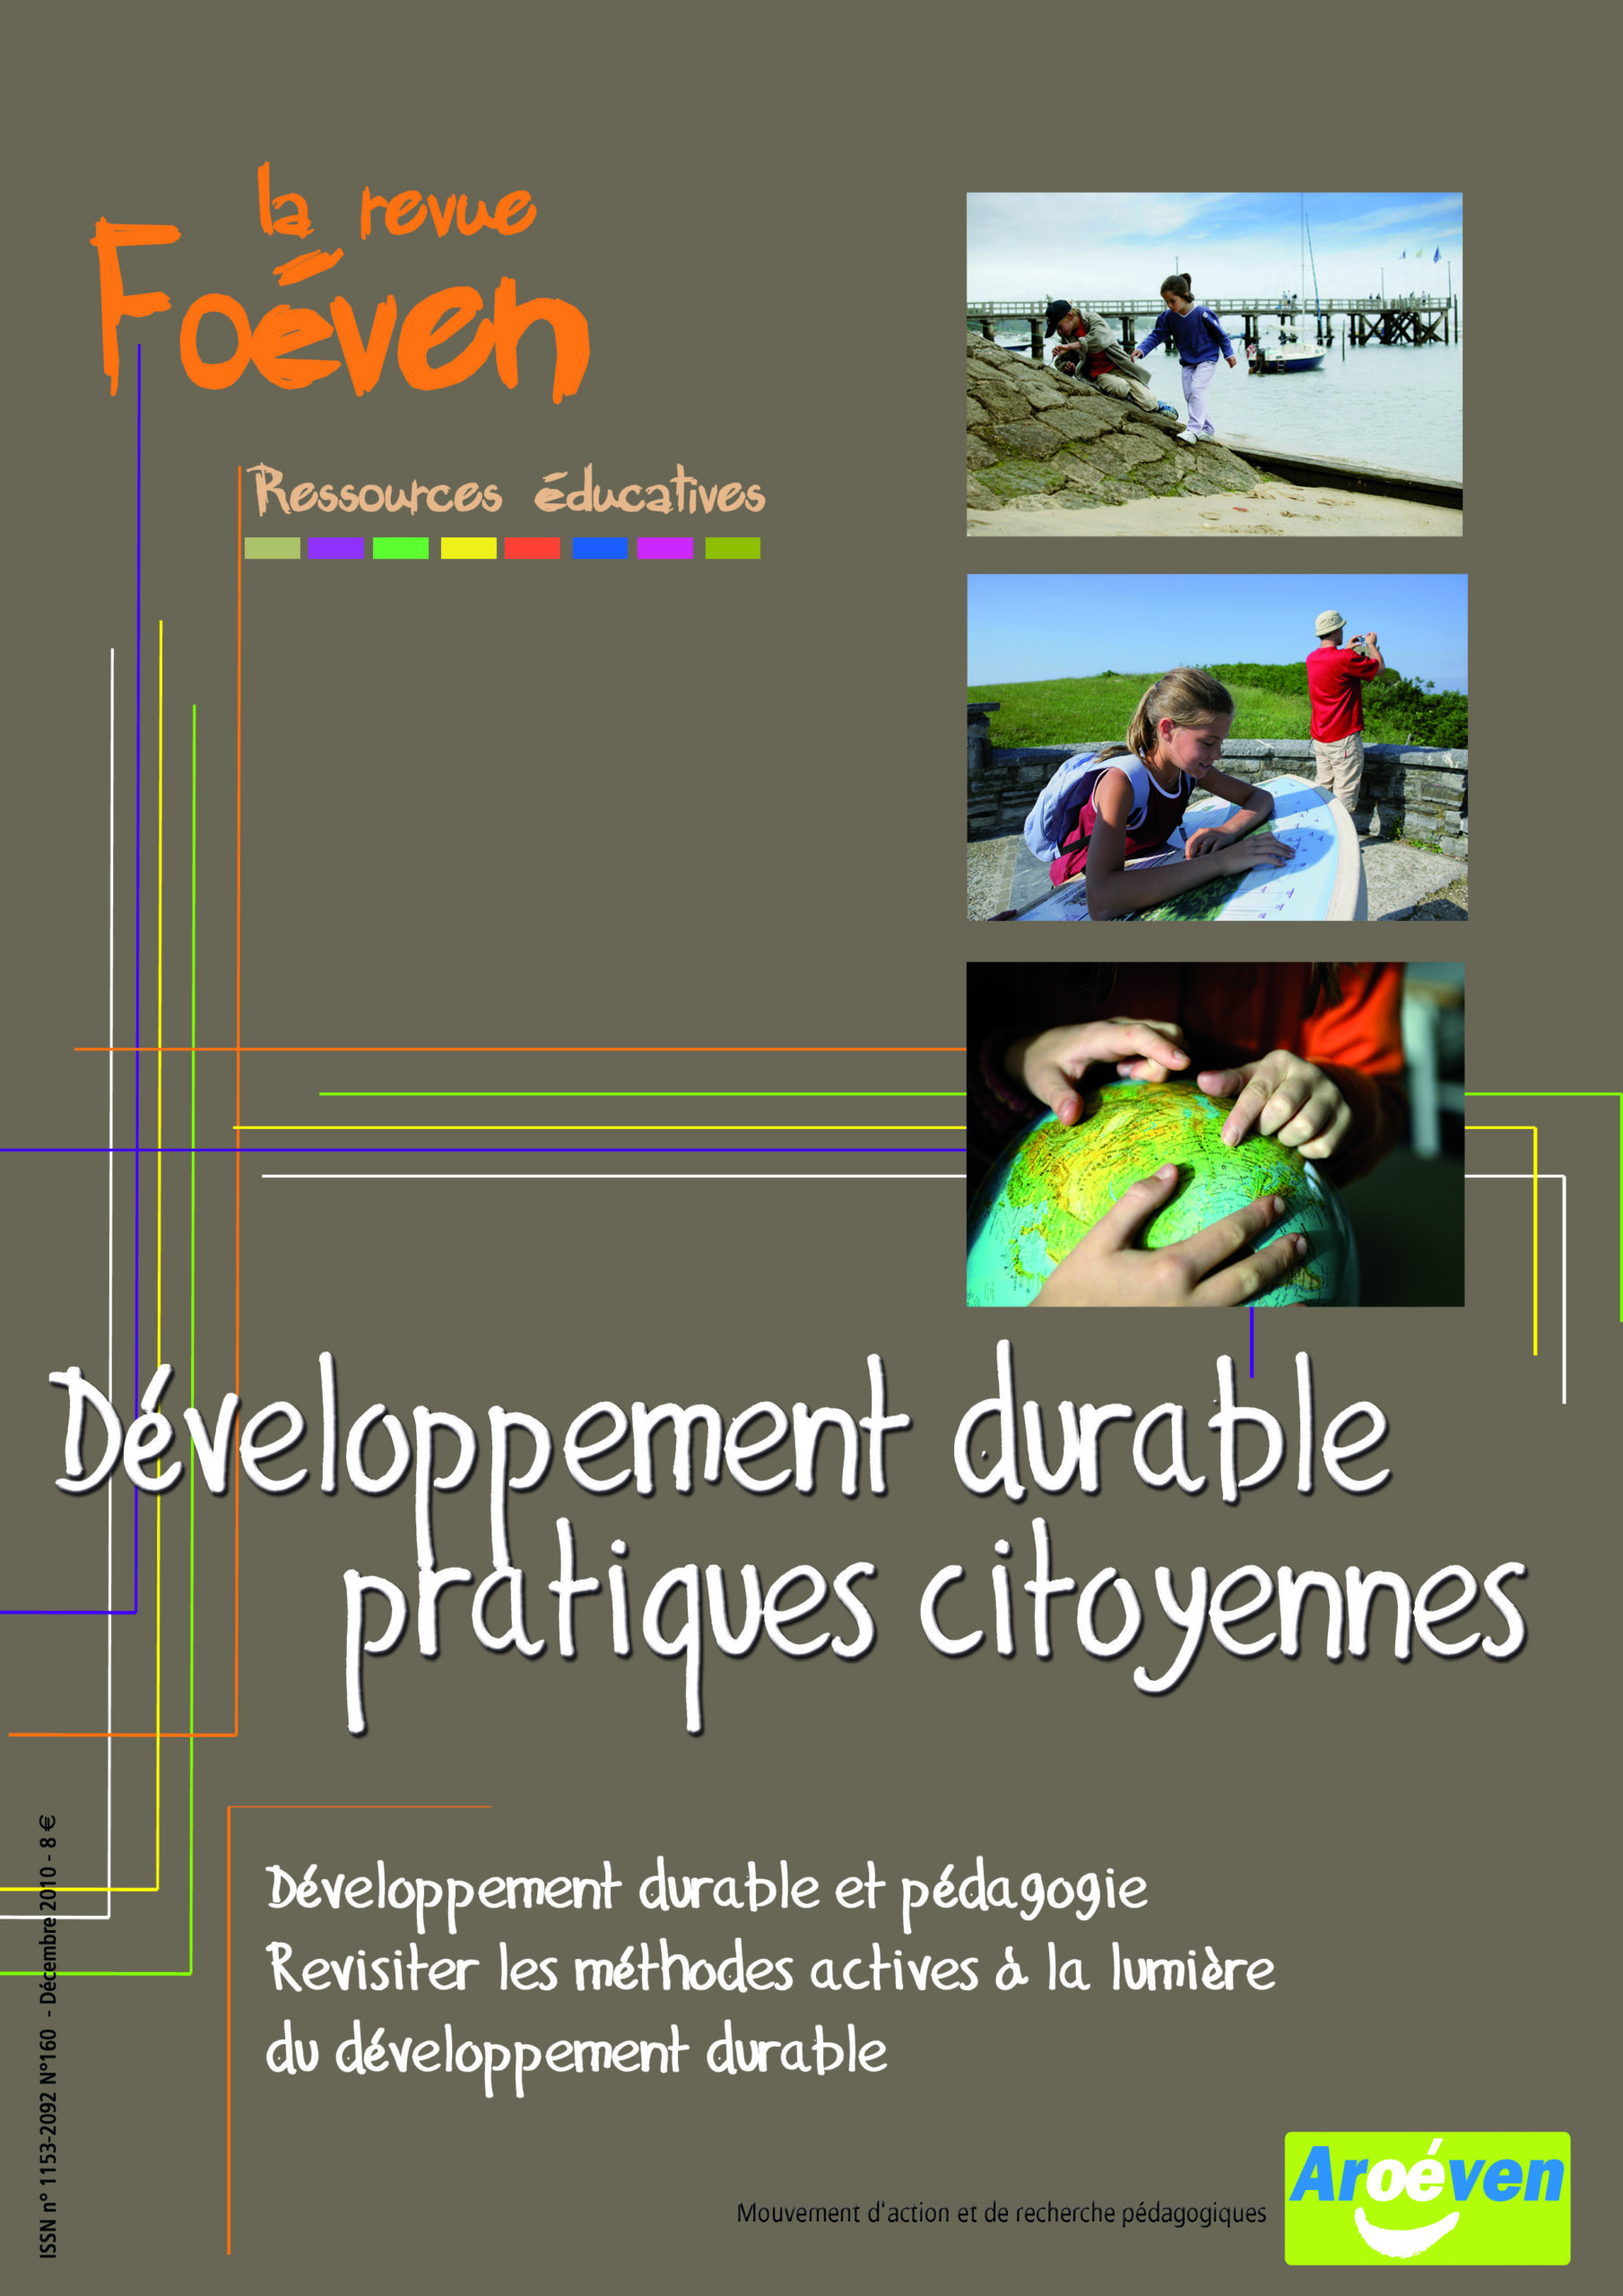 Couverture revue Foeven n°160